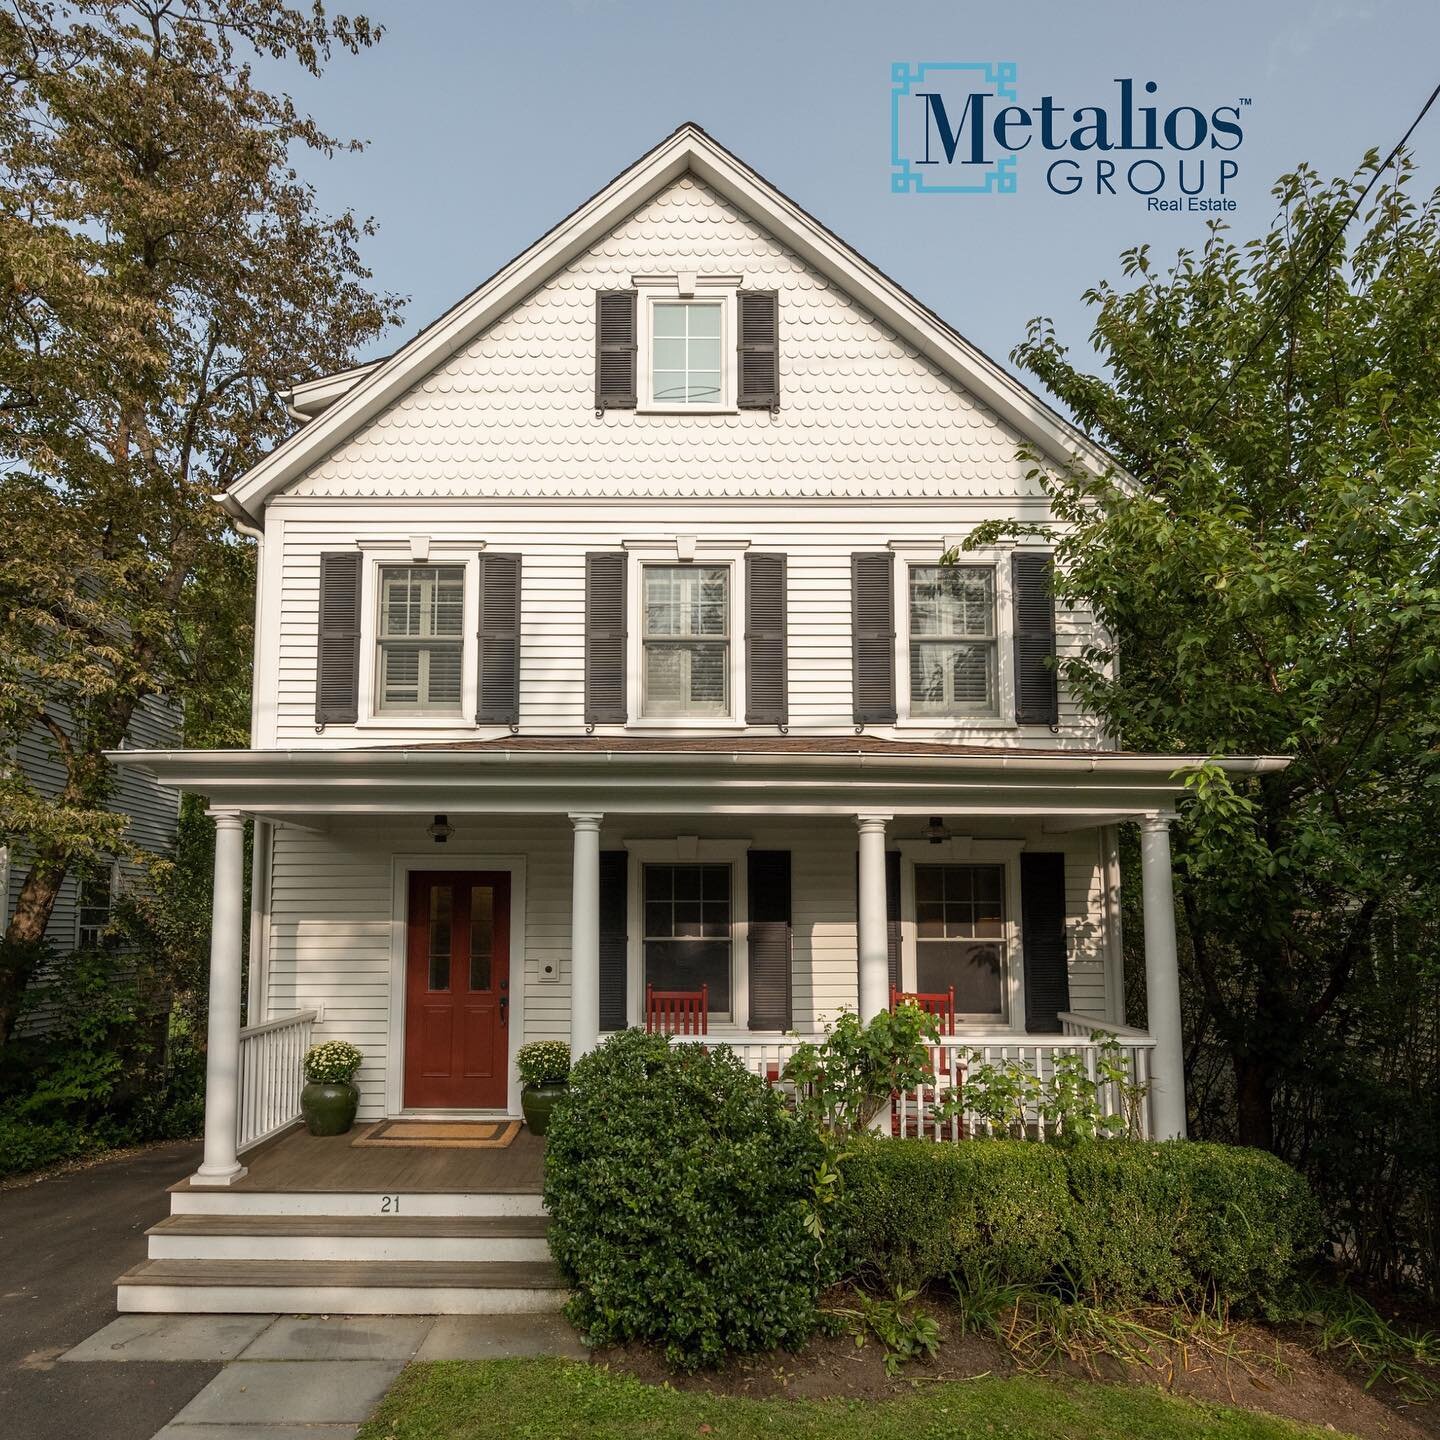 JUST LISTED!

✨21 Prospect St, Greenwich CT ✨ 

Downtown meets country! This stylish updated colonial farmhouse is just steps from downtown Greenwich! 

Four renovated levels include authentic crown moldings, continuous oak hardwood floors, and ample